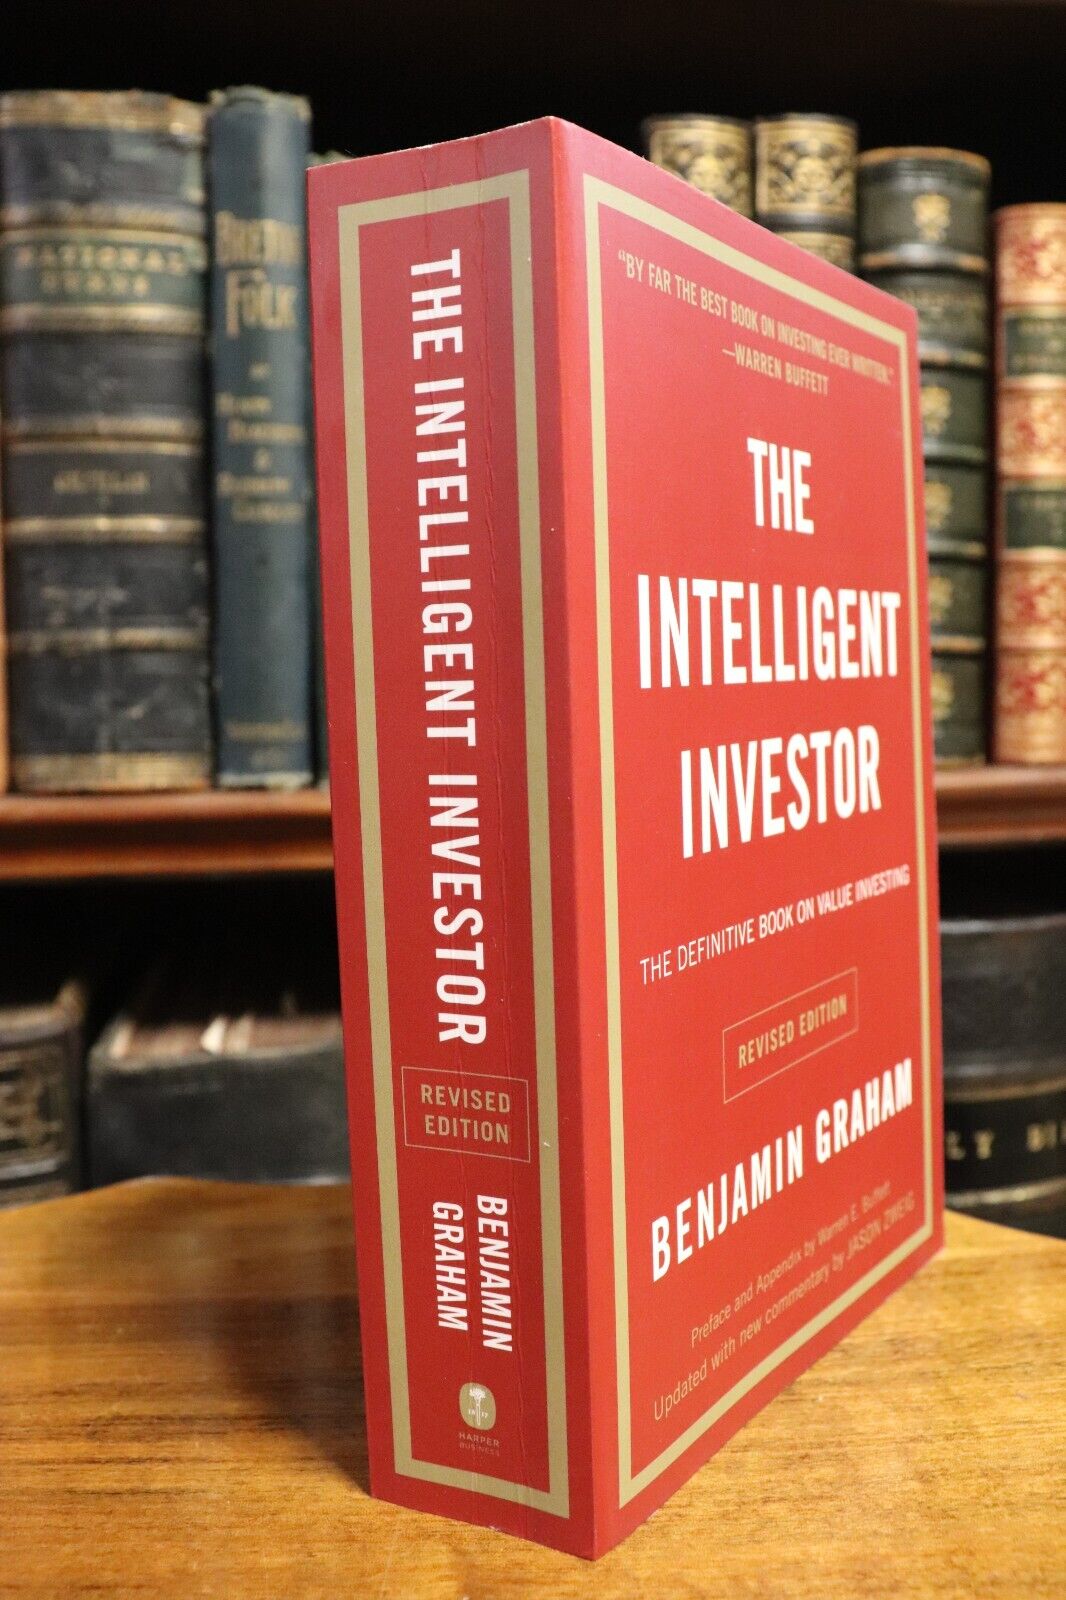 The Intelligent Investor by Benjamin Graham - 2003 - Financial Investing Book